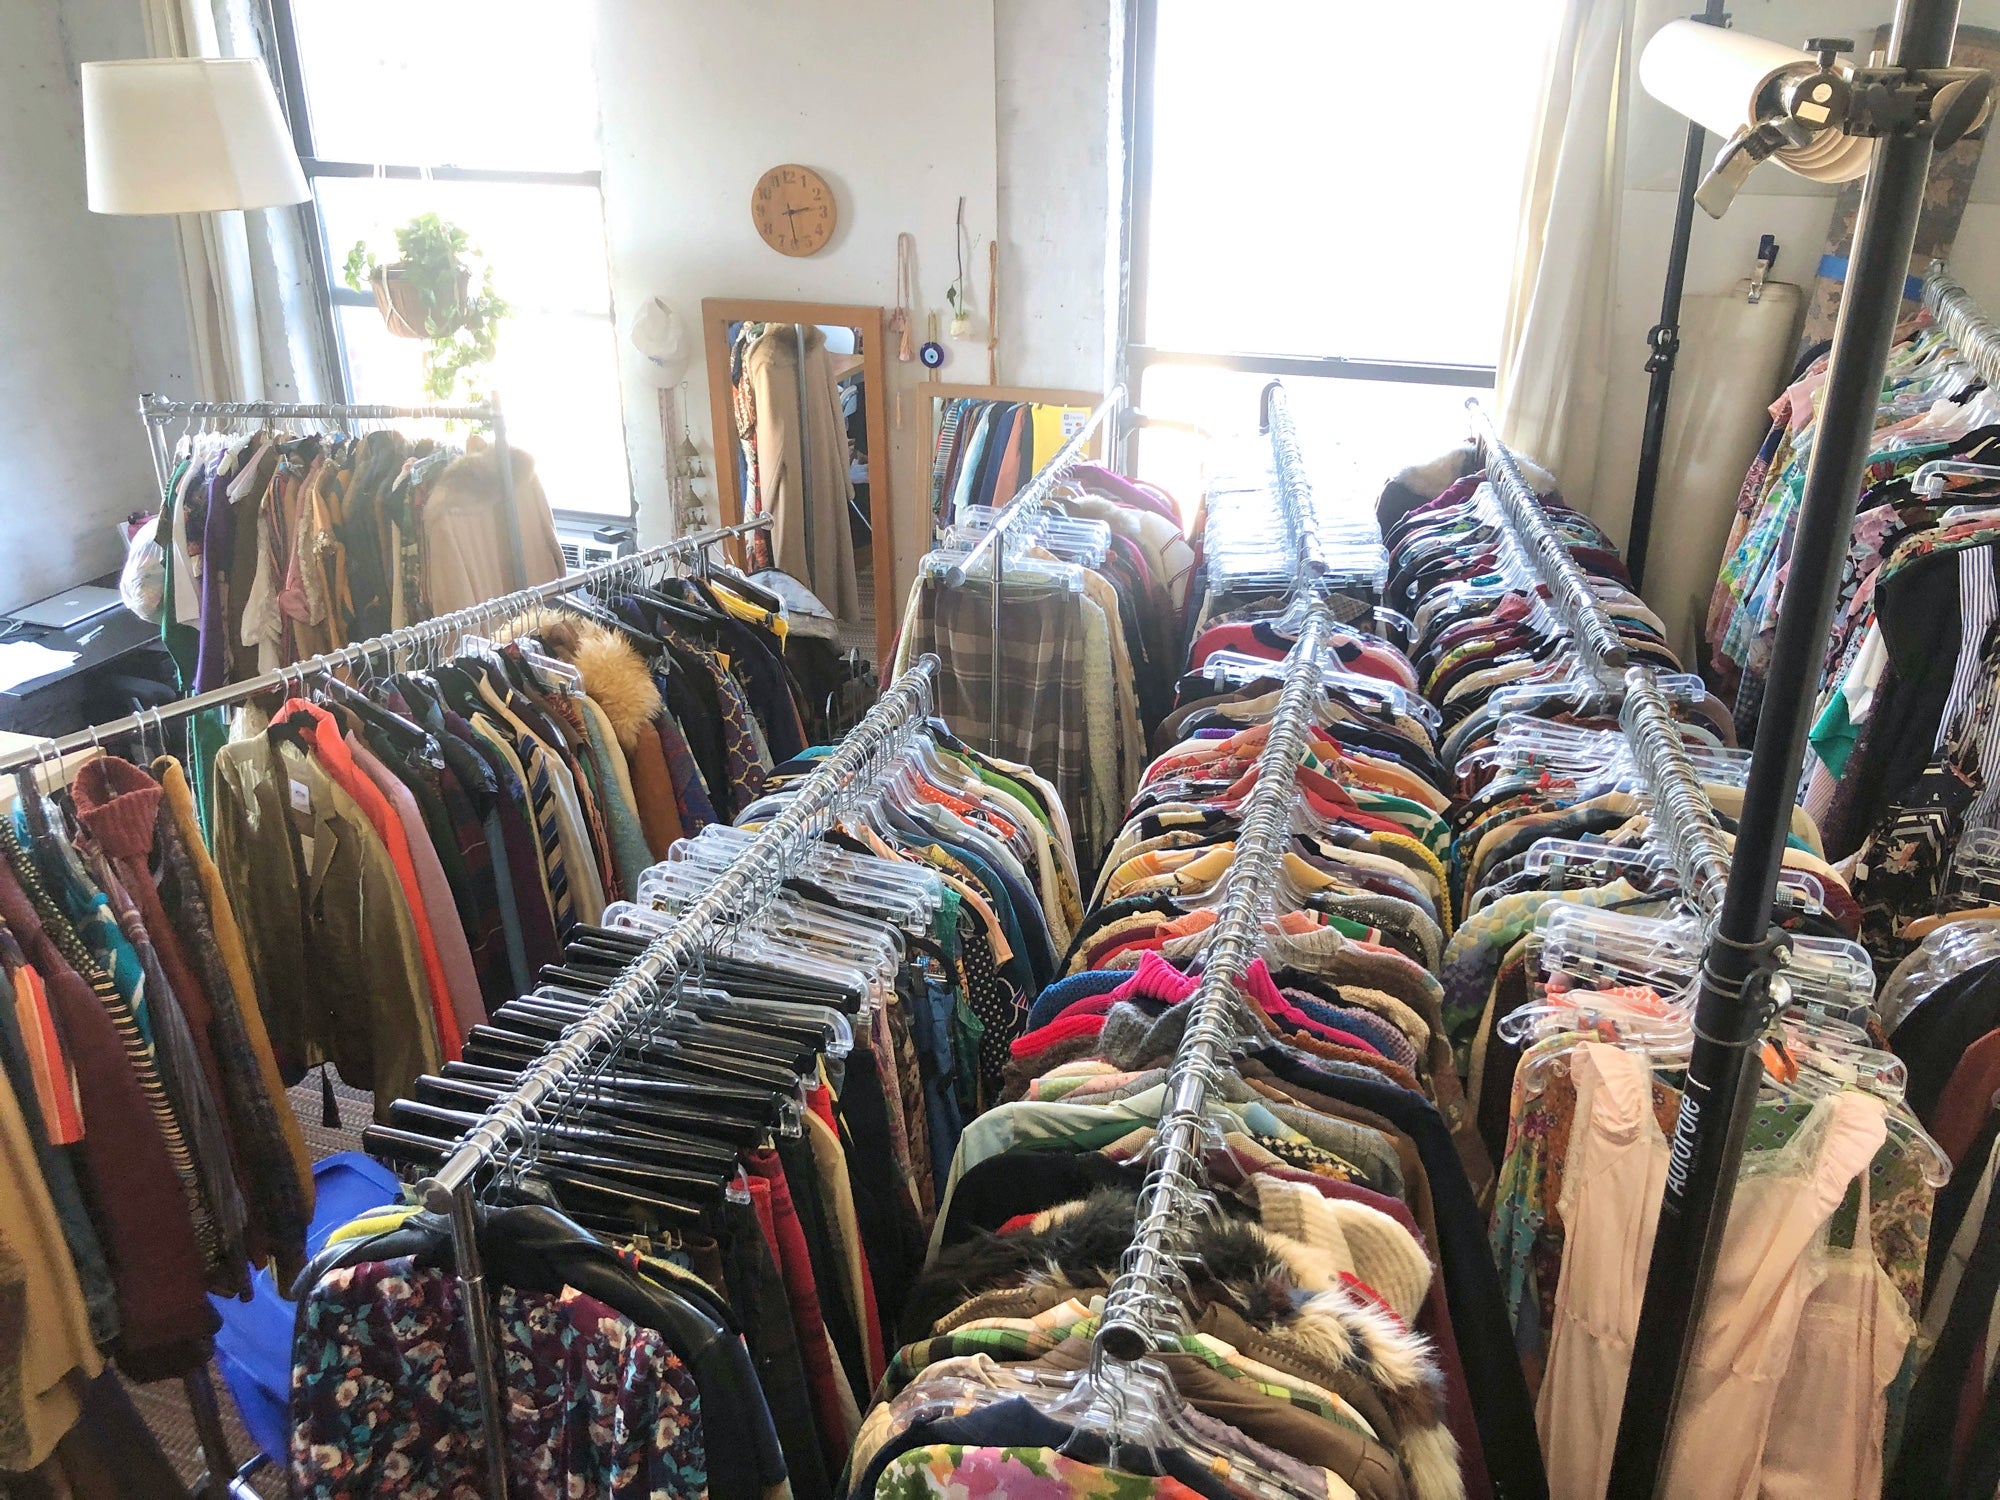 Room filled with racks of vintage clothing